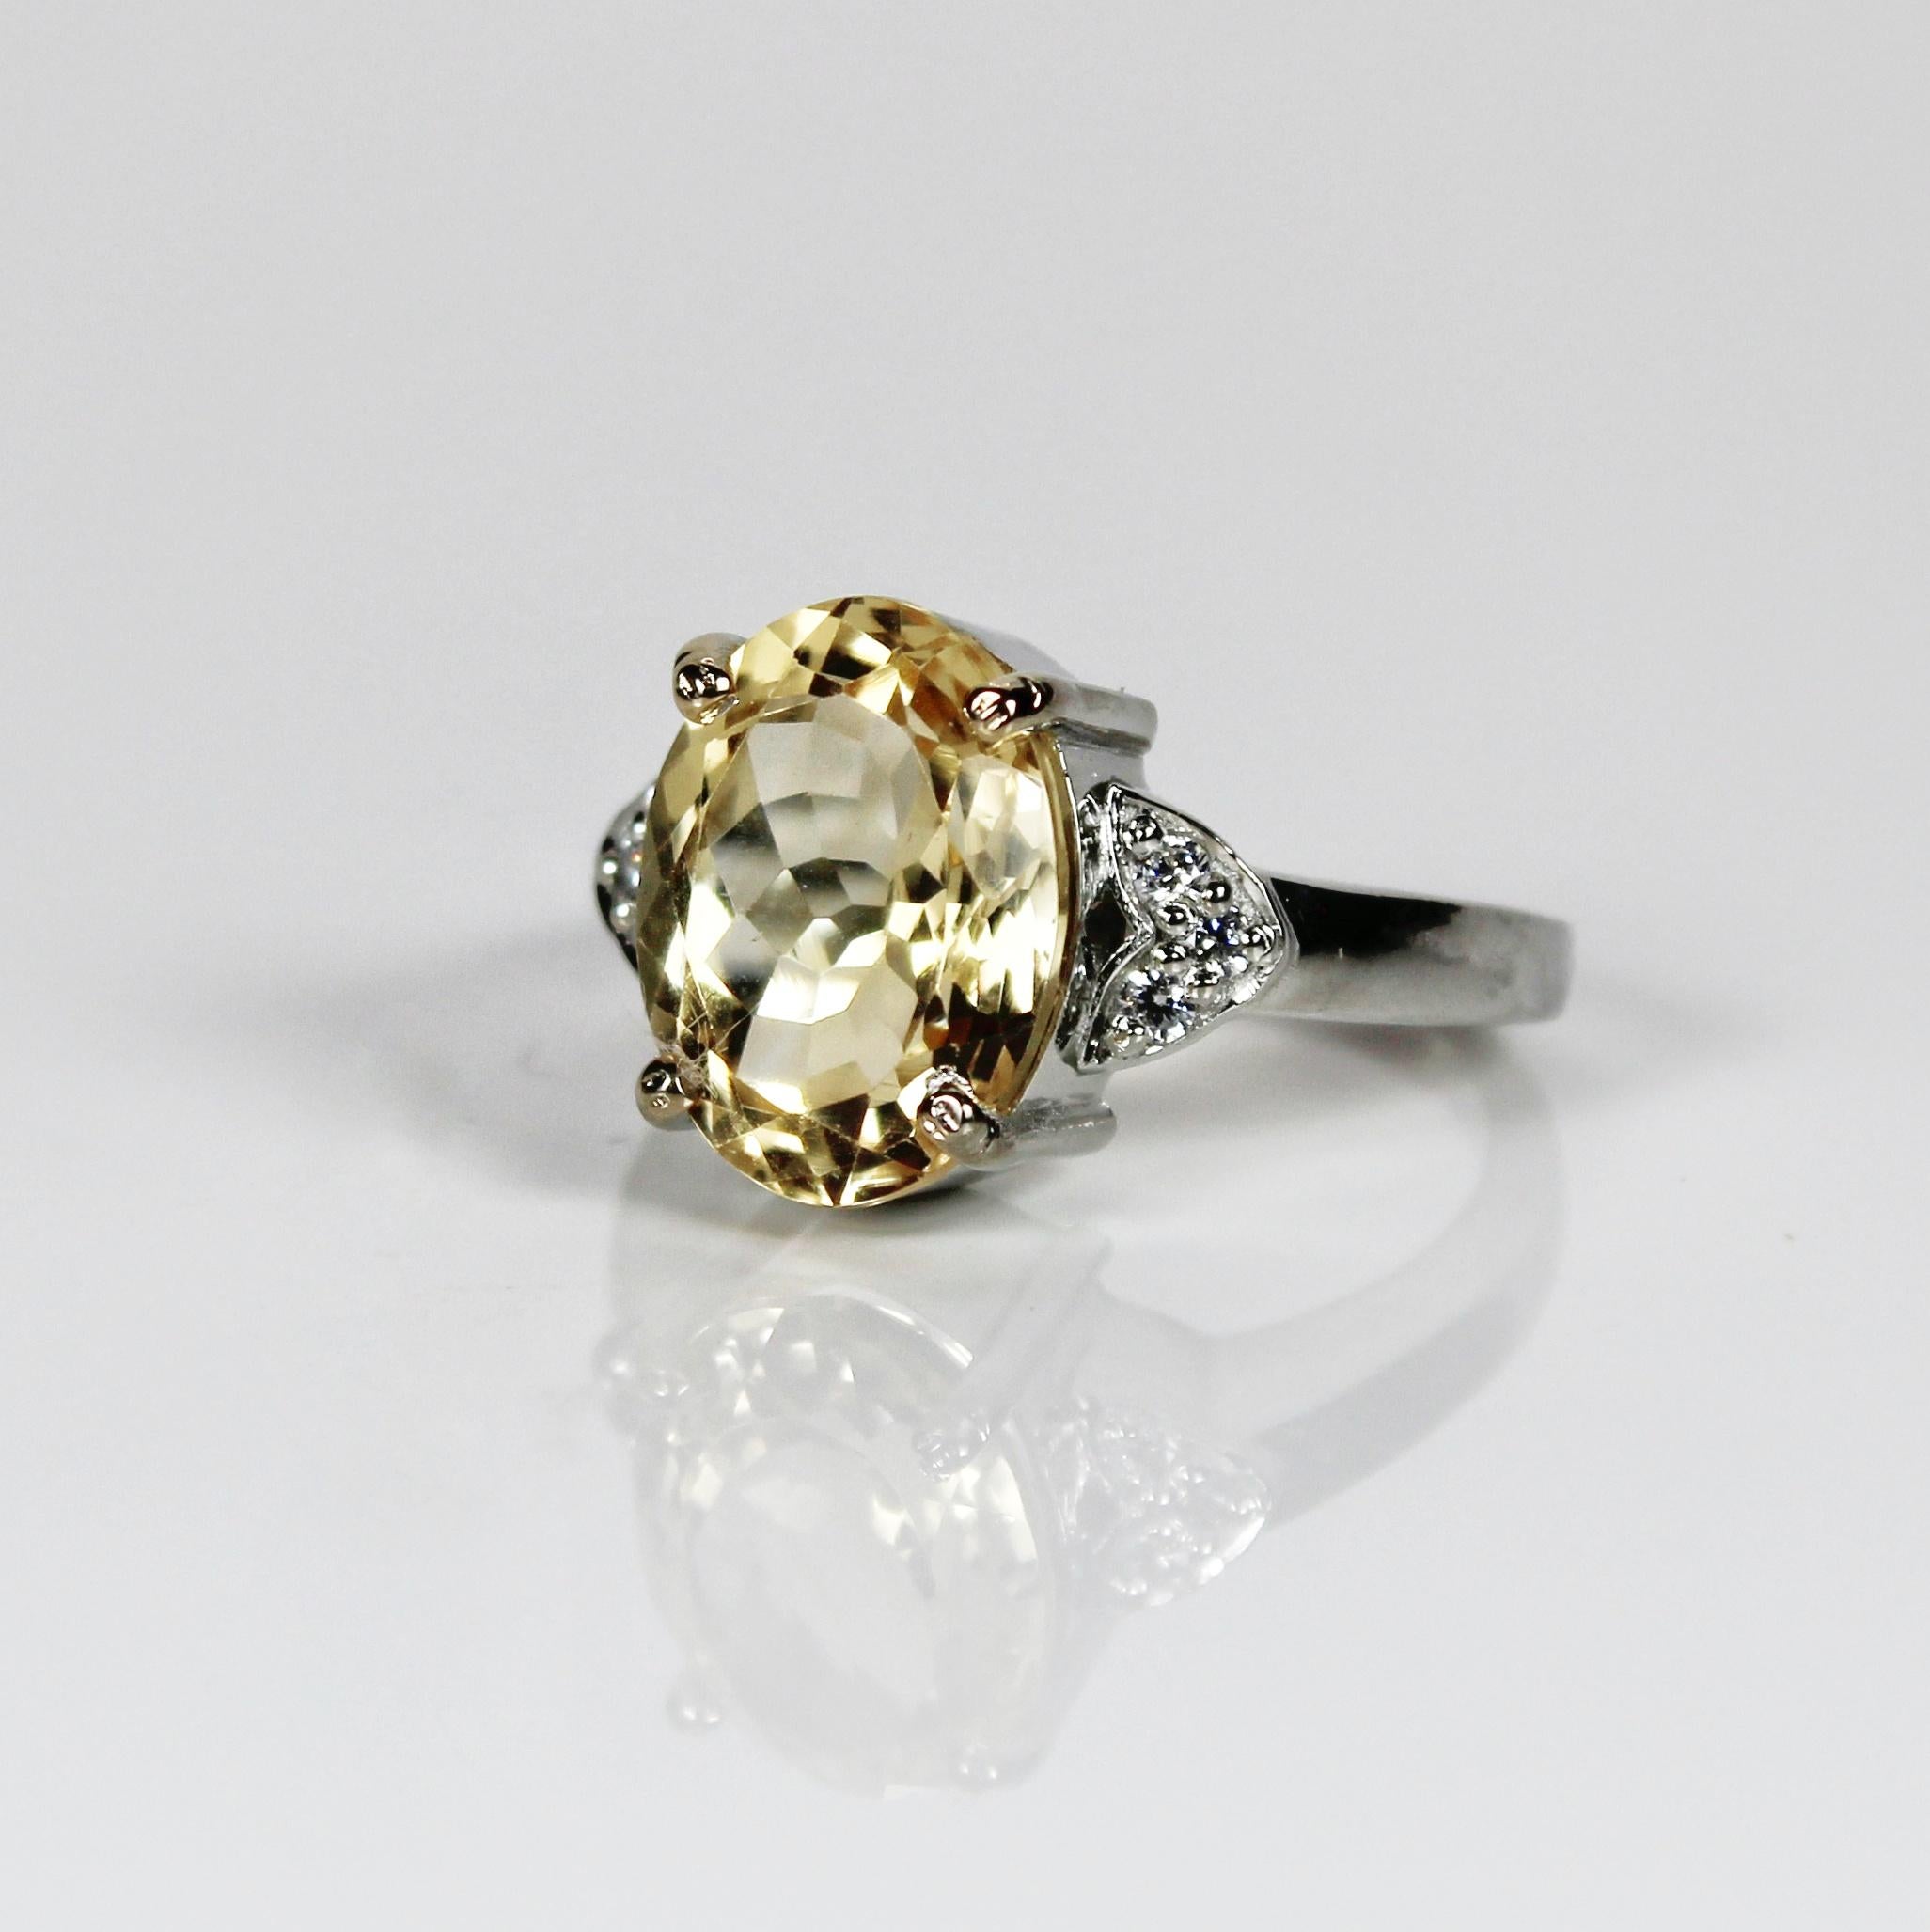 Metal - Silver
Indian ring size - 11
Product gross Weight - 4.990 Grams
Gemstone - Natural Citrine
Stone weight - 4.45 Carat
Stone shape - Oval
Stone size - 13 x 9 mm
Diamonds - Swarovski

Elegant designer ring made in silver with beautiful natural